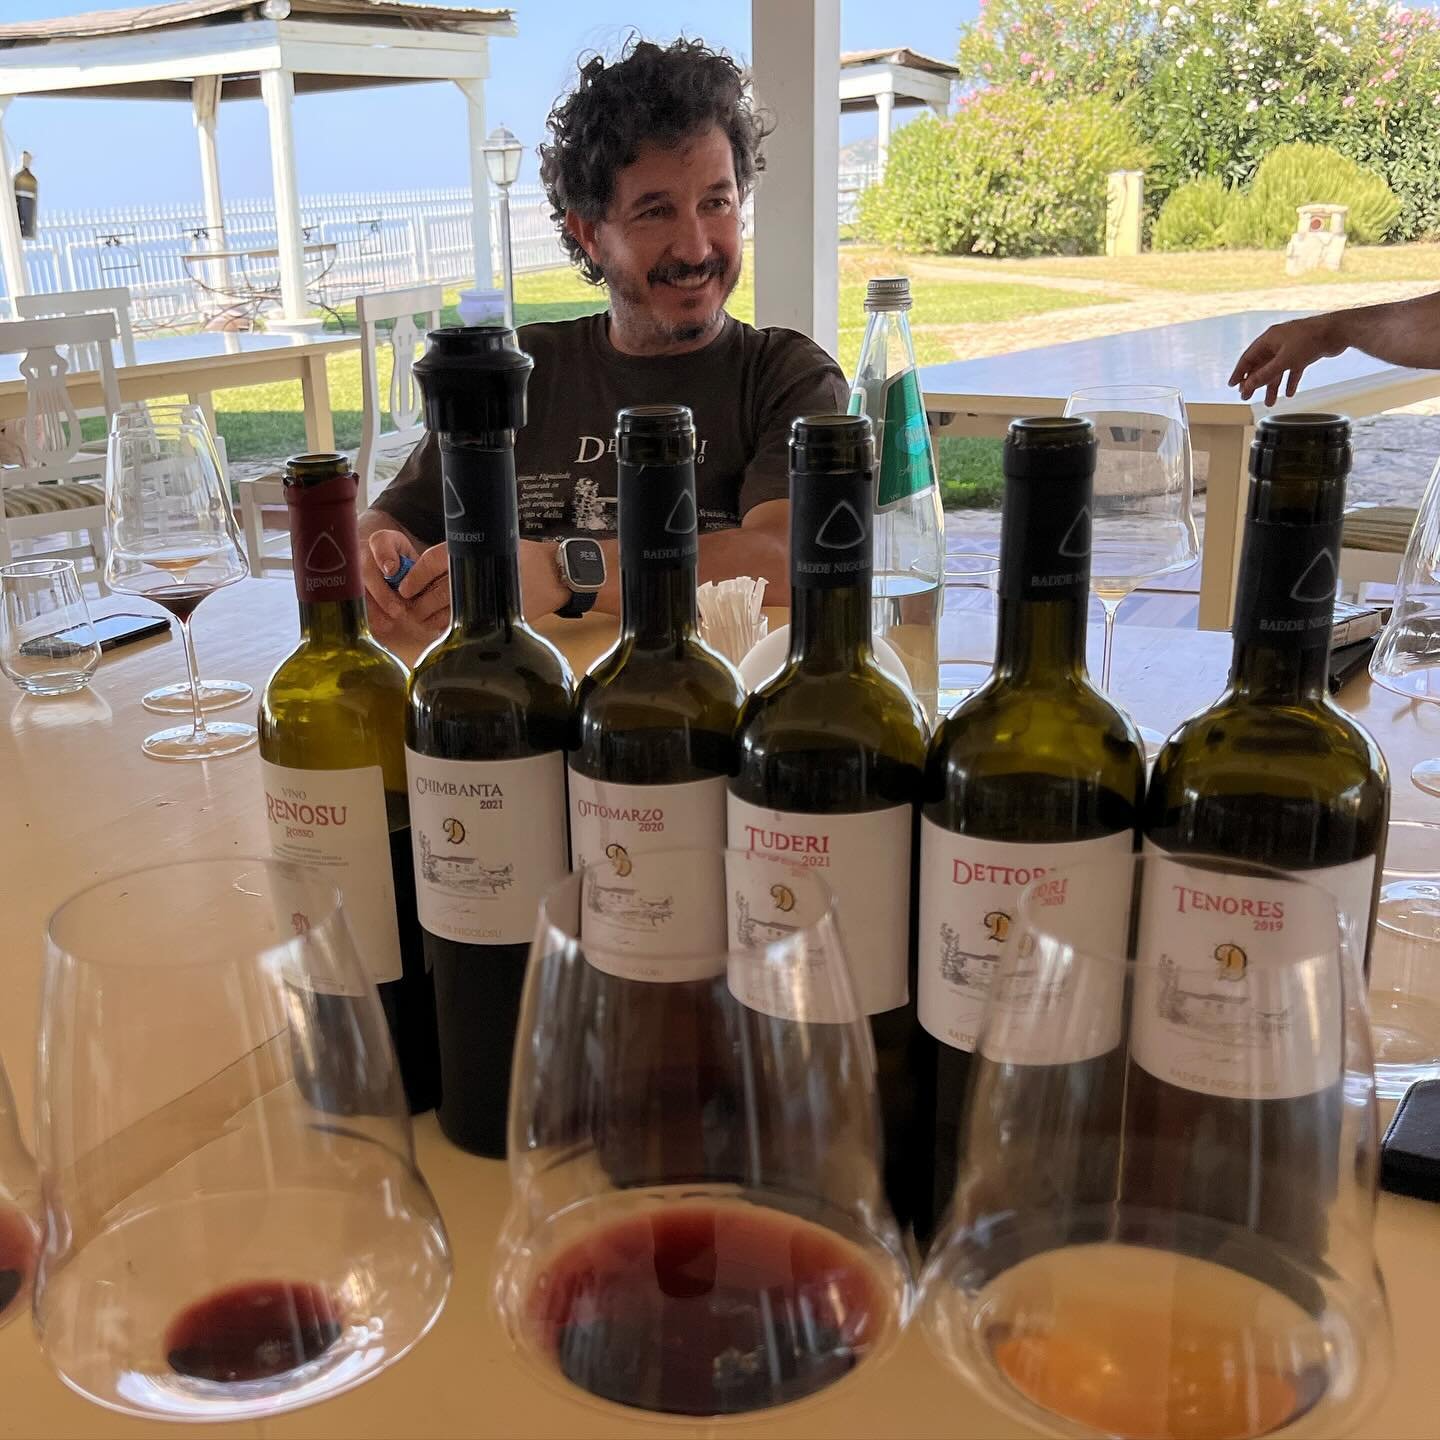 Dettori&rsquo;s wines are finally here!🥳🇮🇹🍷

The Dettori Family has pioneered biodynamic farming and natural winemaking since 1860. Located in northern Sardinia, in a region called &ldquo;Romangia&rdquo; after the Roman colony that ruled these la